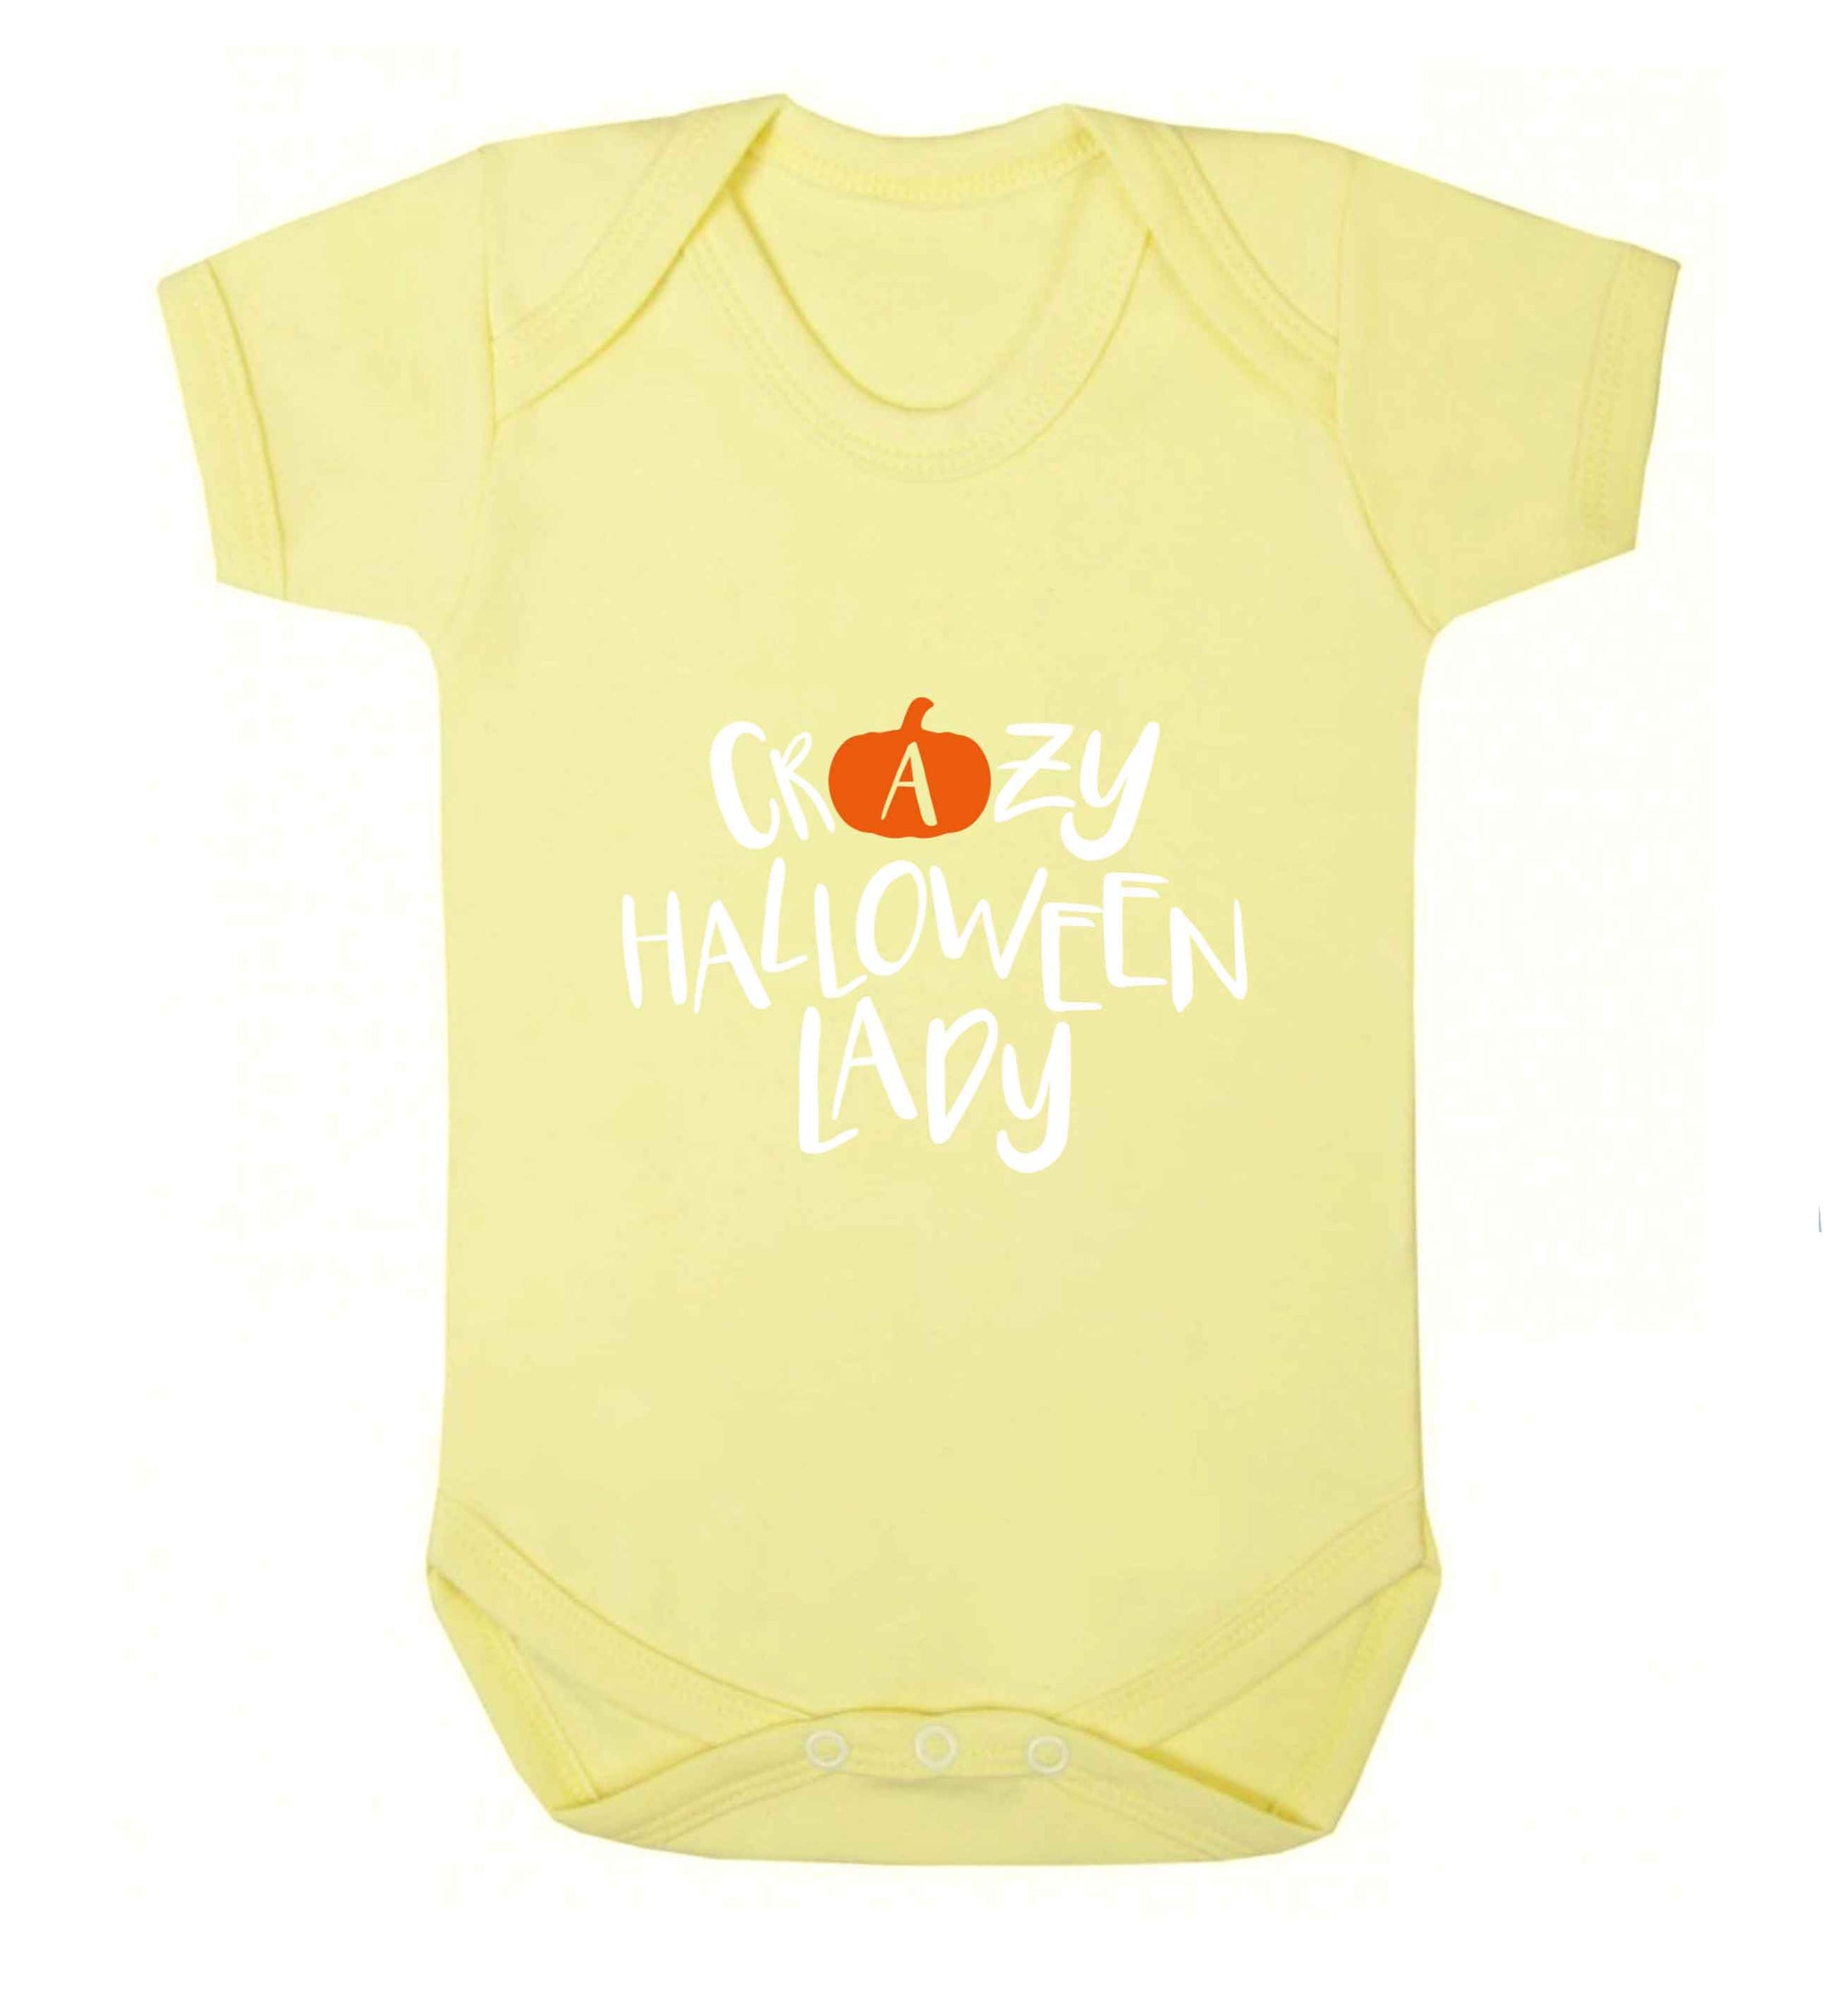 Crazy halloween lady baby vest pale yellow 18-24 months